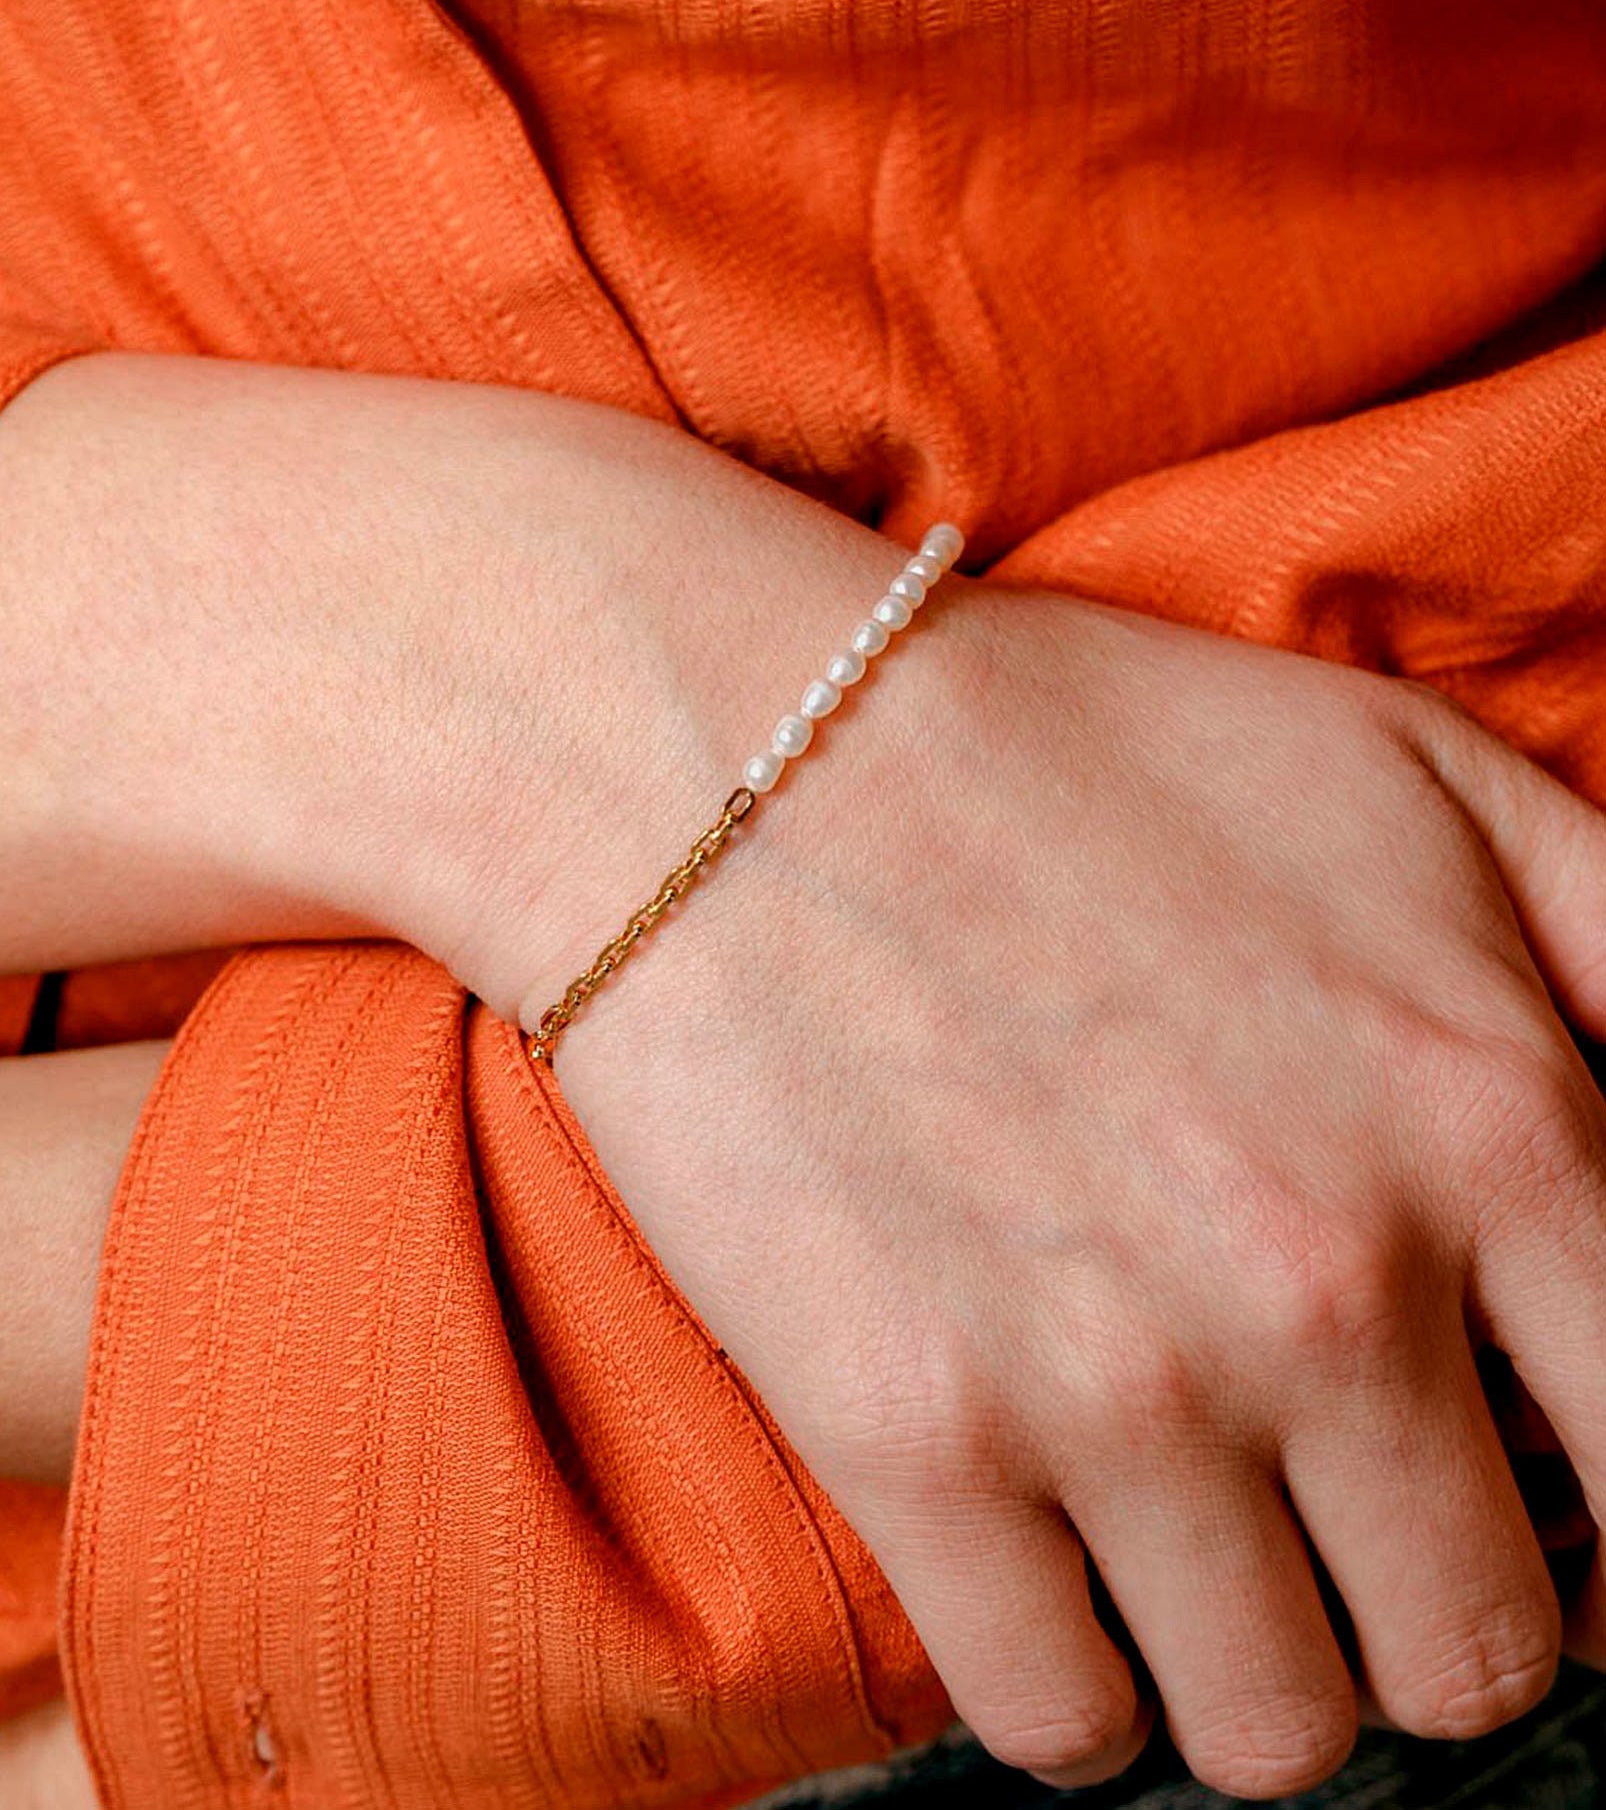 A person wearing the bracelet on their wrist